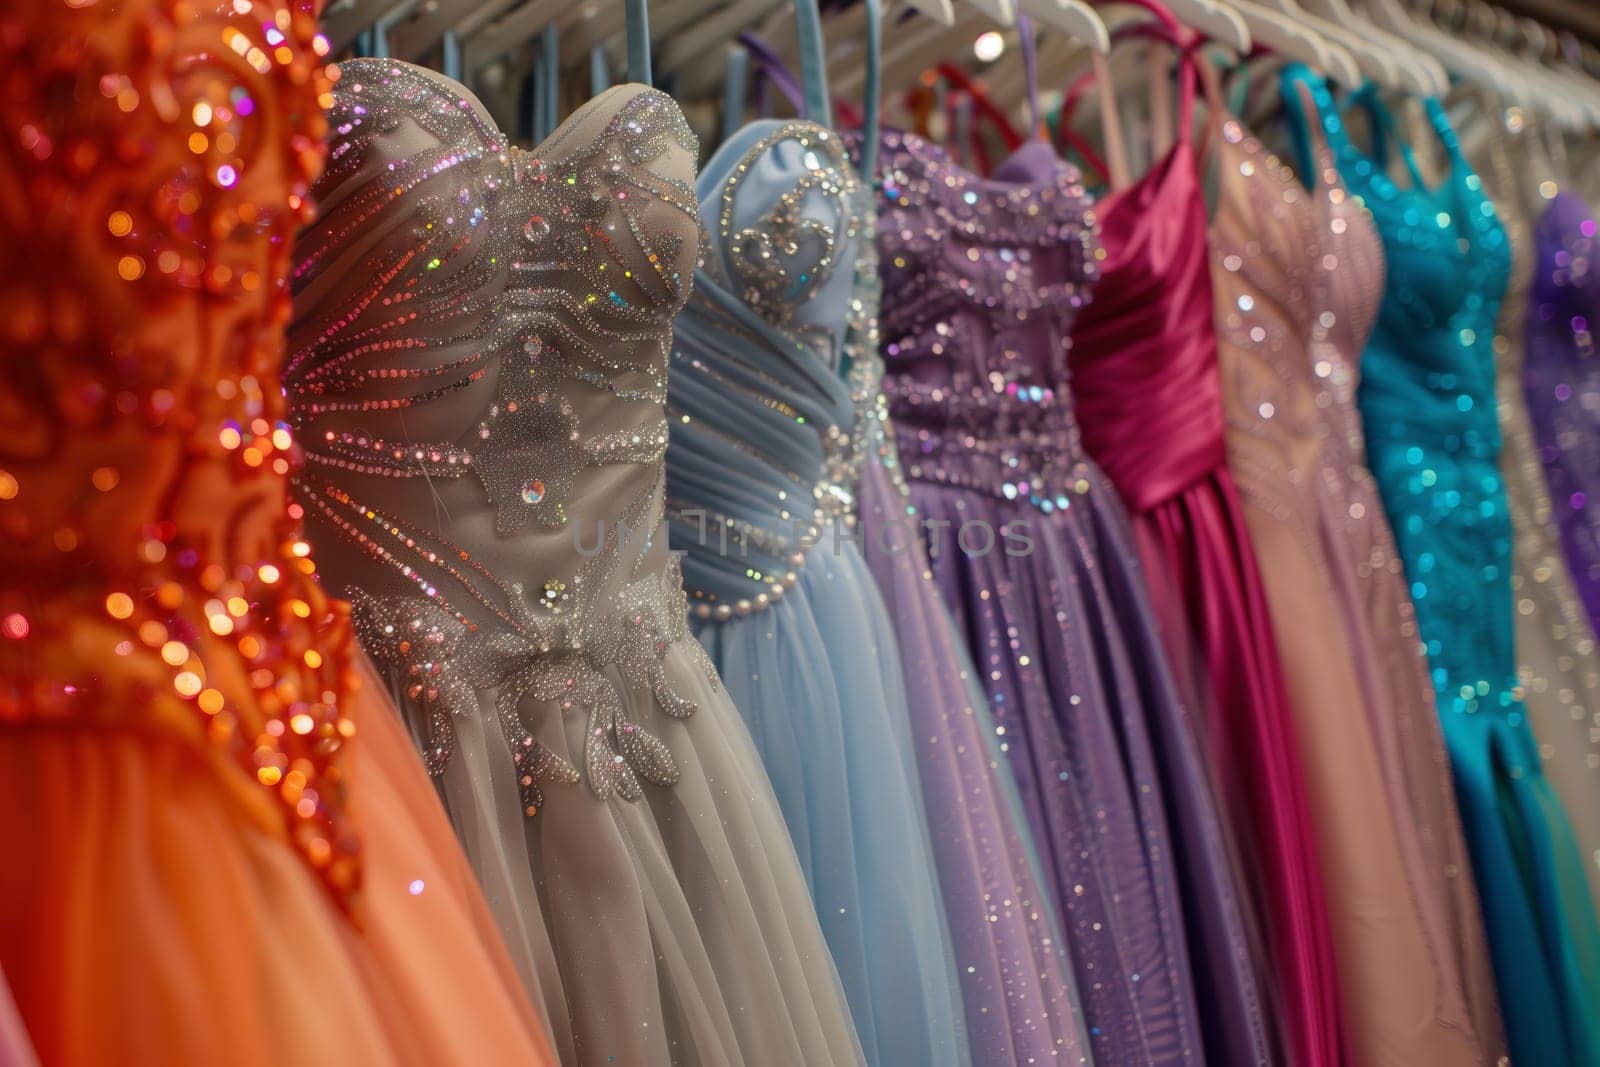 A row of vibrant prom dresses showcasing fashion design, magenta hues, intricate patterns, and embellishments hanging in a retail store for a formal wear event